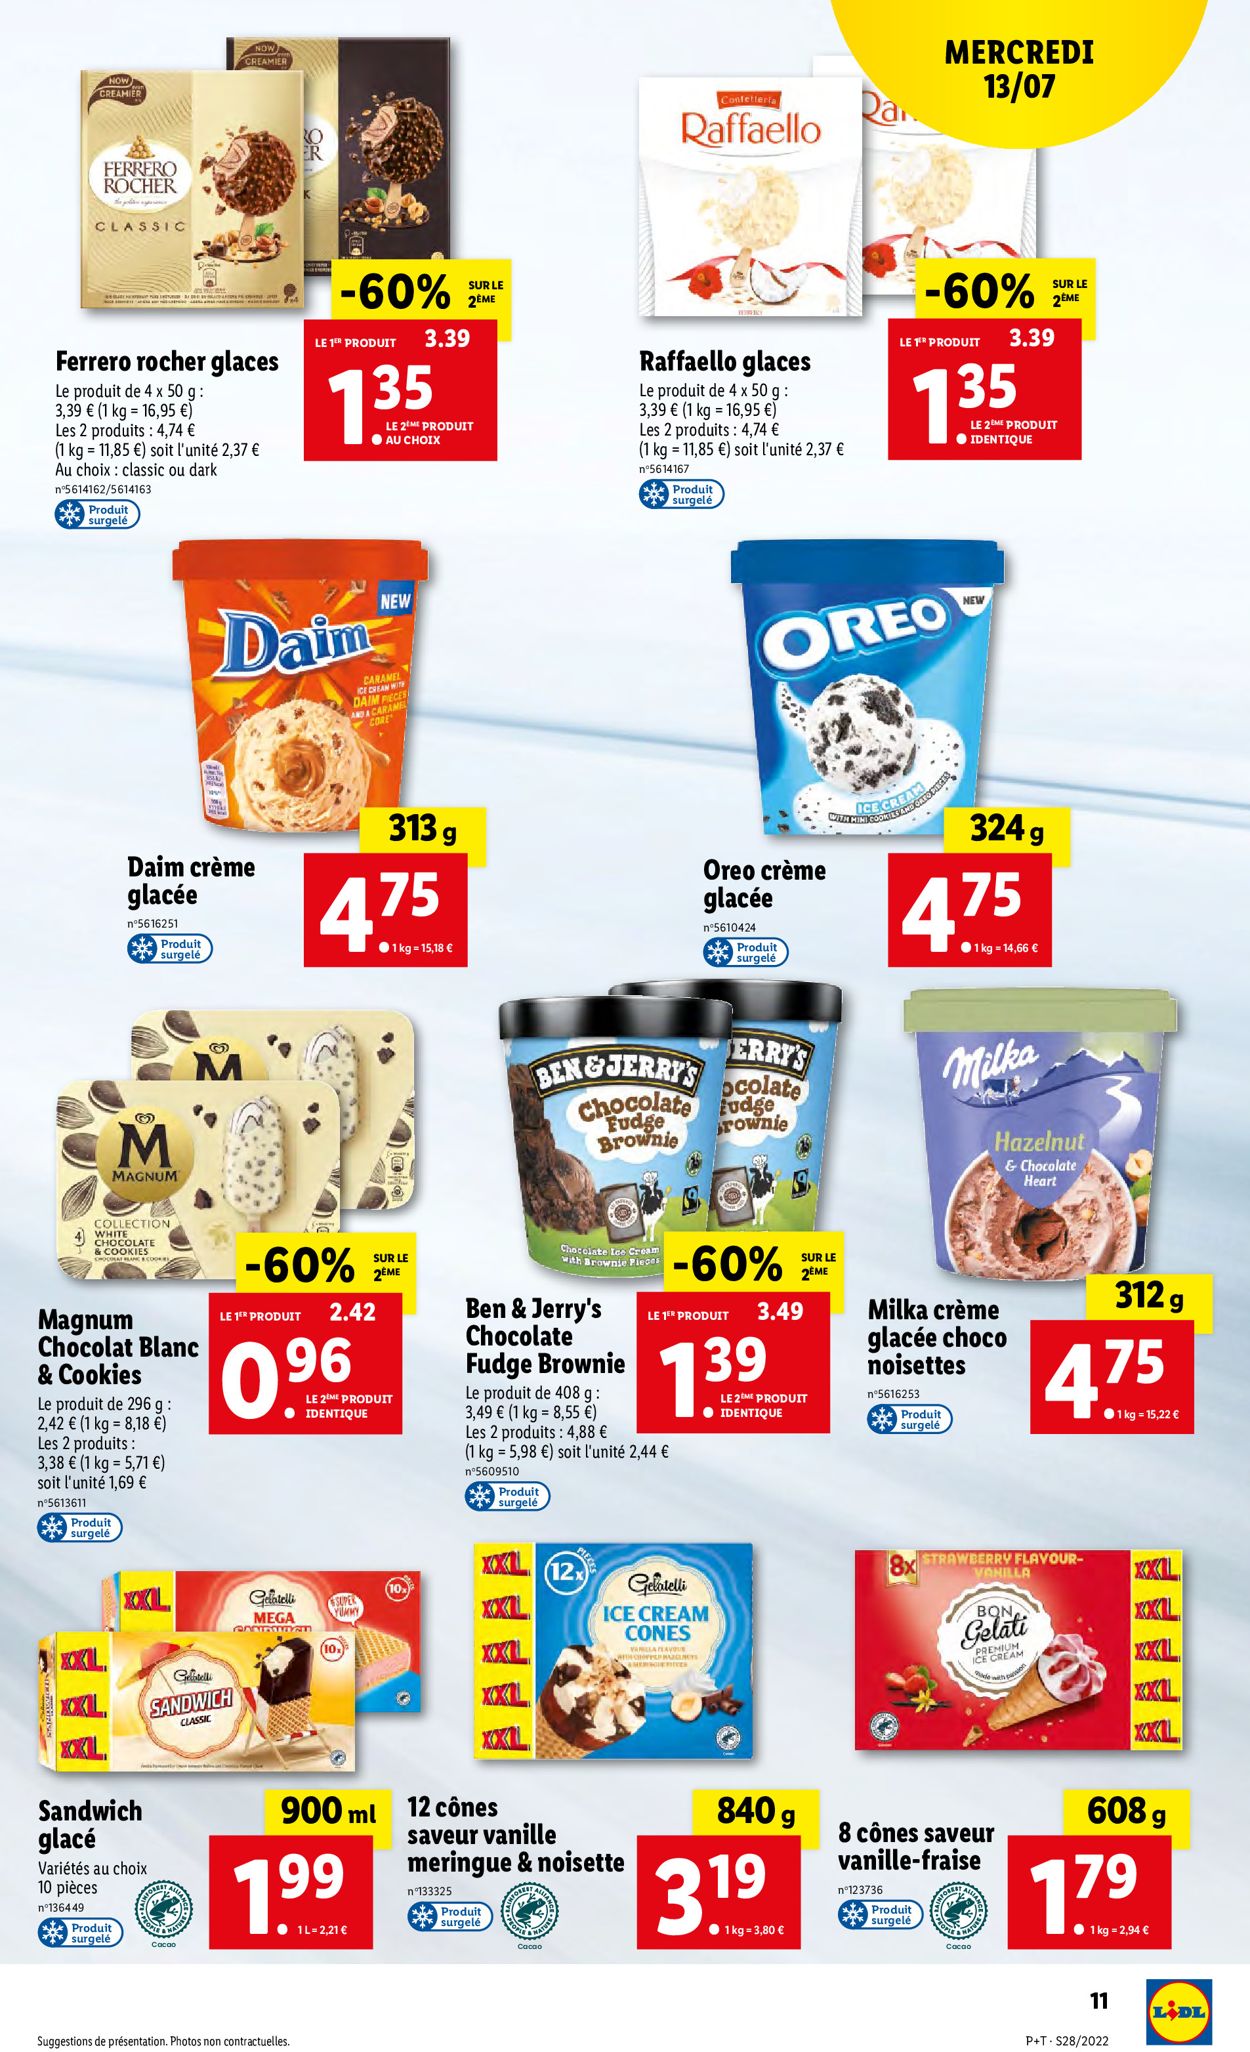 Lidl Catalogue - 13.07-19.07.2022 (Page 11)